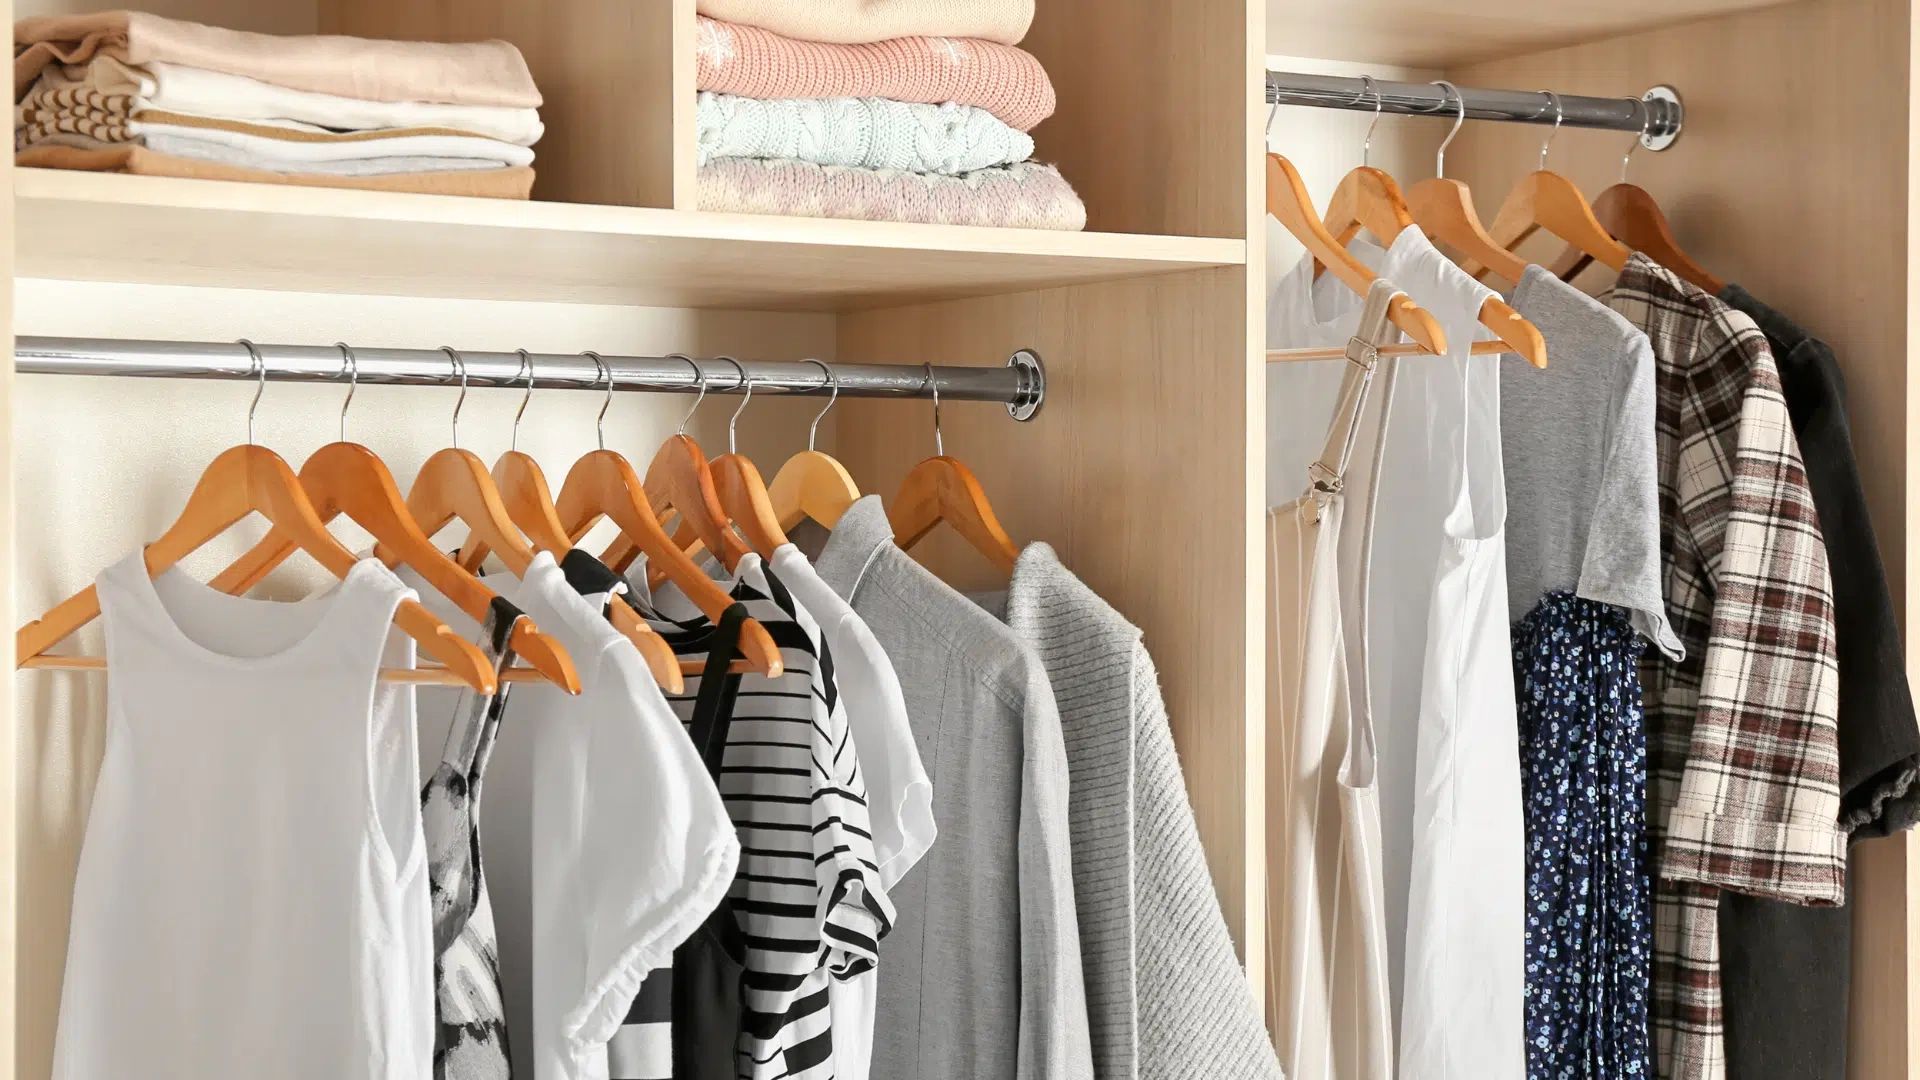 https://img1.wsimg.com/isteam/ip/fa358b78-a6f9-4575-bb39-821b44bcbc2f/Organize%20and%20Maximize%20Your%20Closet%20Space%20-%20Ora.webp